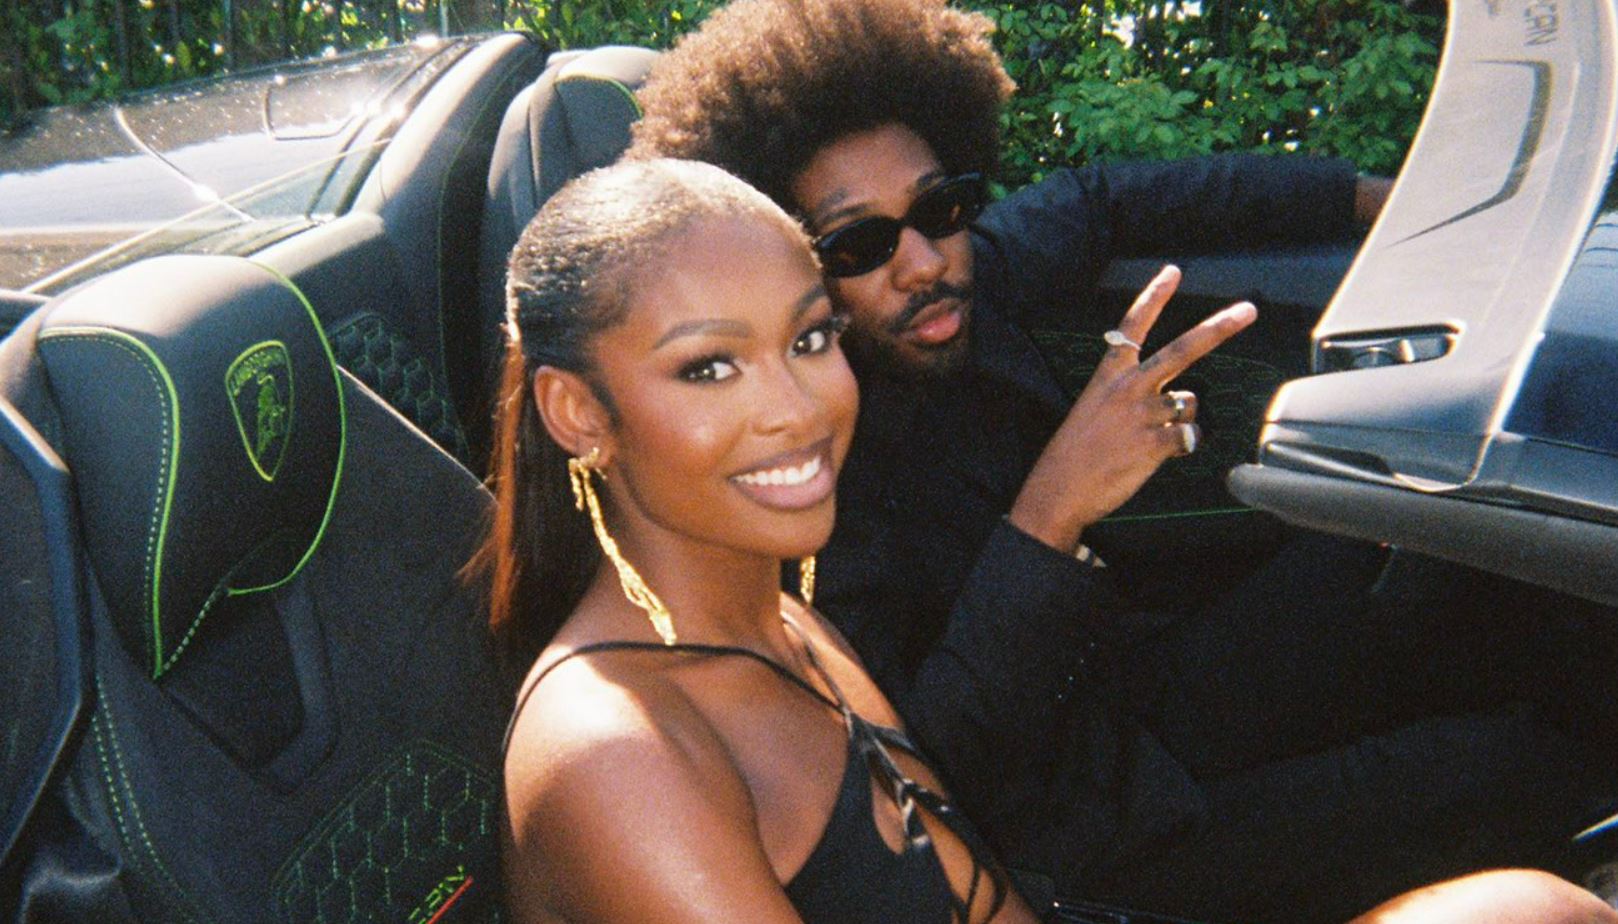 "Brent Faiyaz and Coco Jones Release Mesmerizing 'Moment of Your Life' Collaboration"